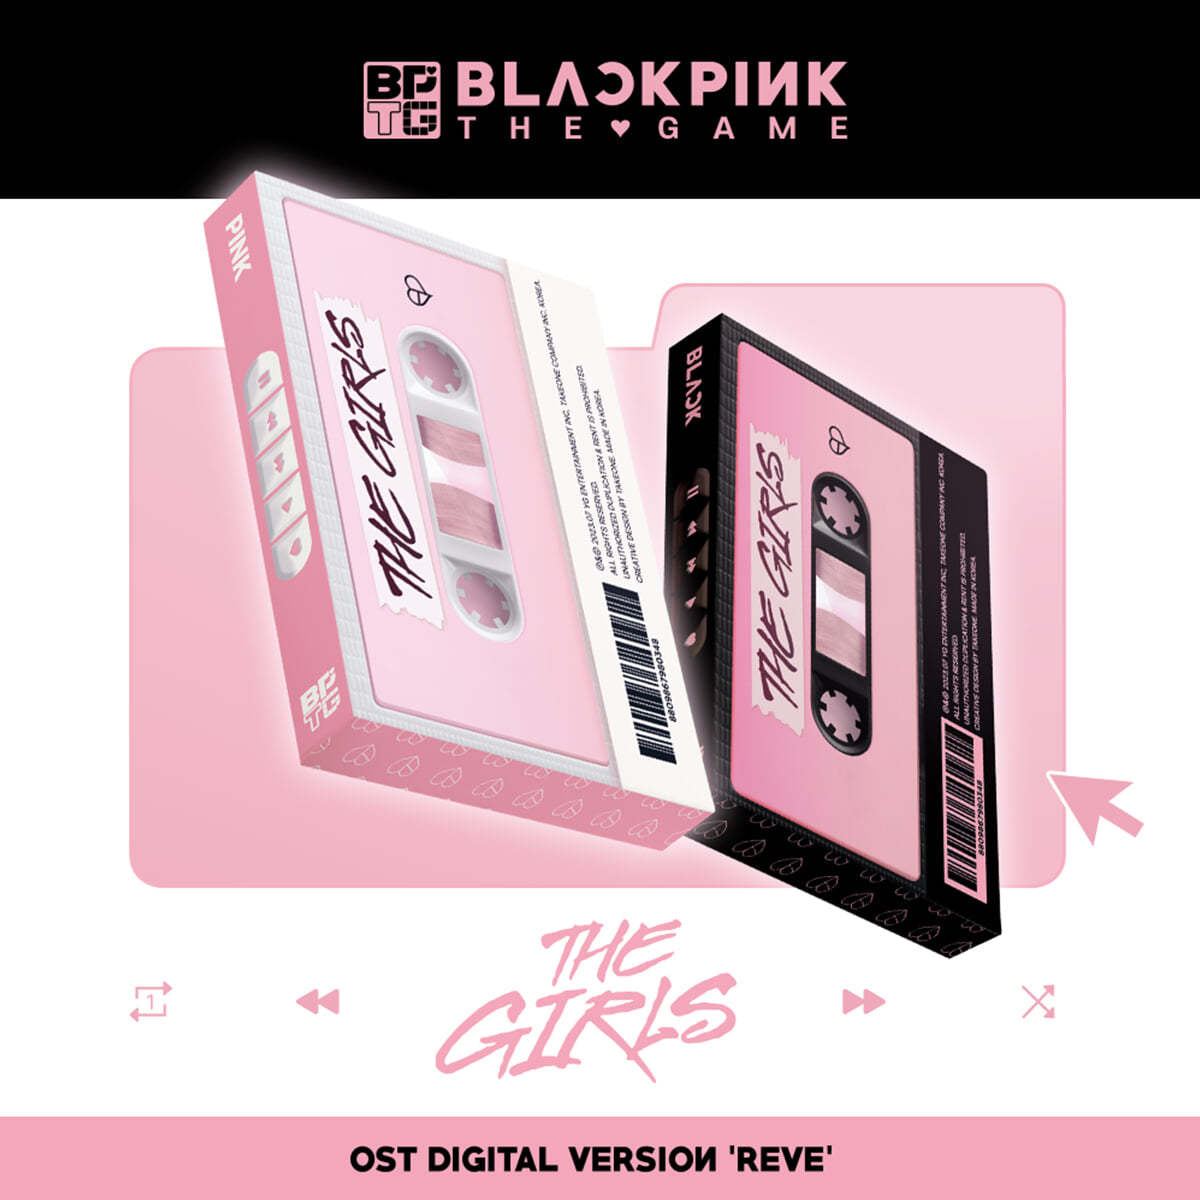 BLACKPINK' Credit Cards Officially Released in Korea